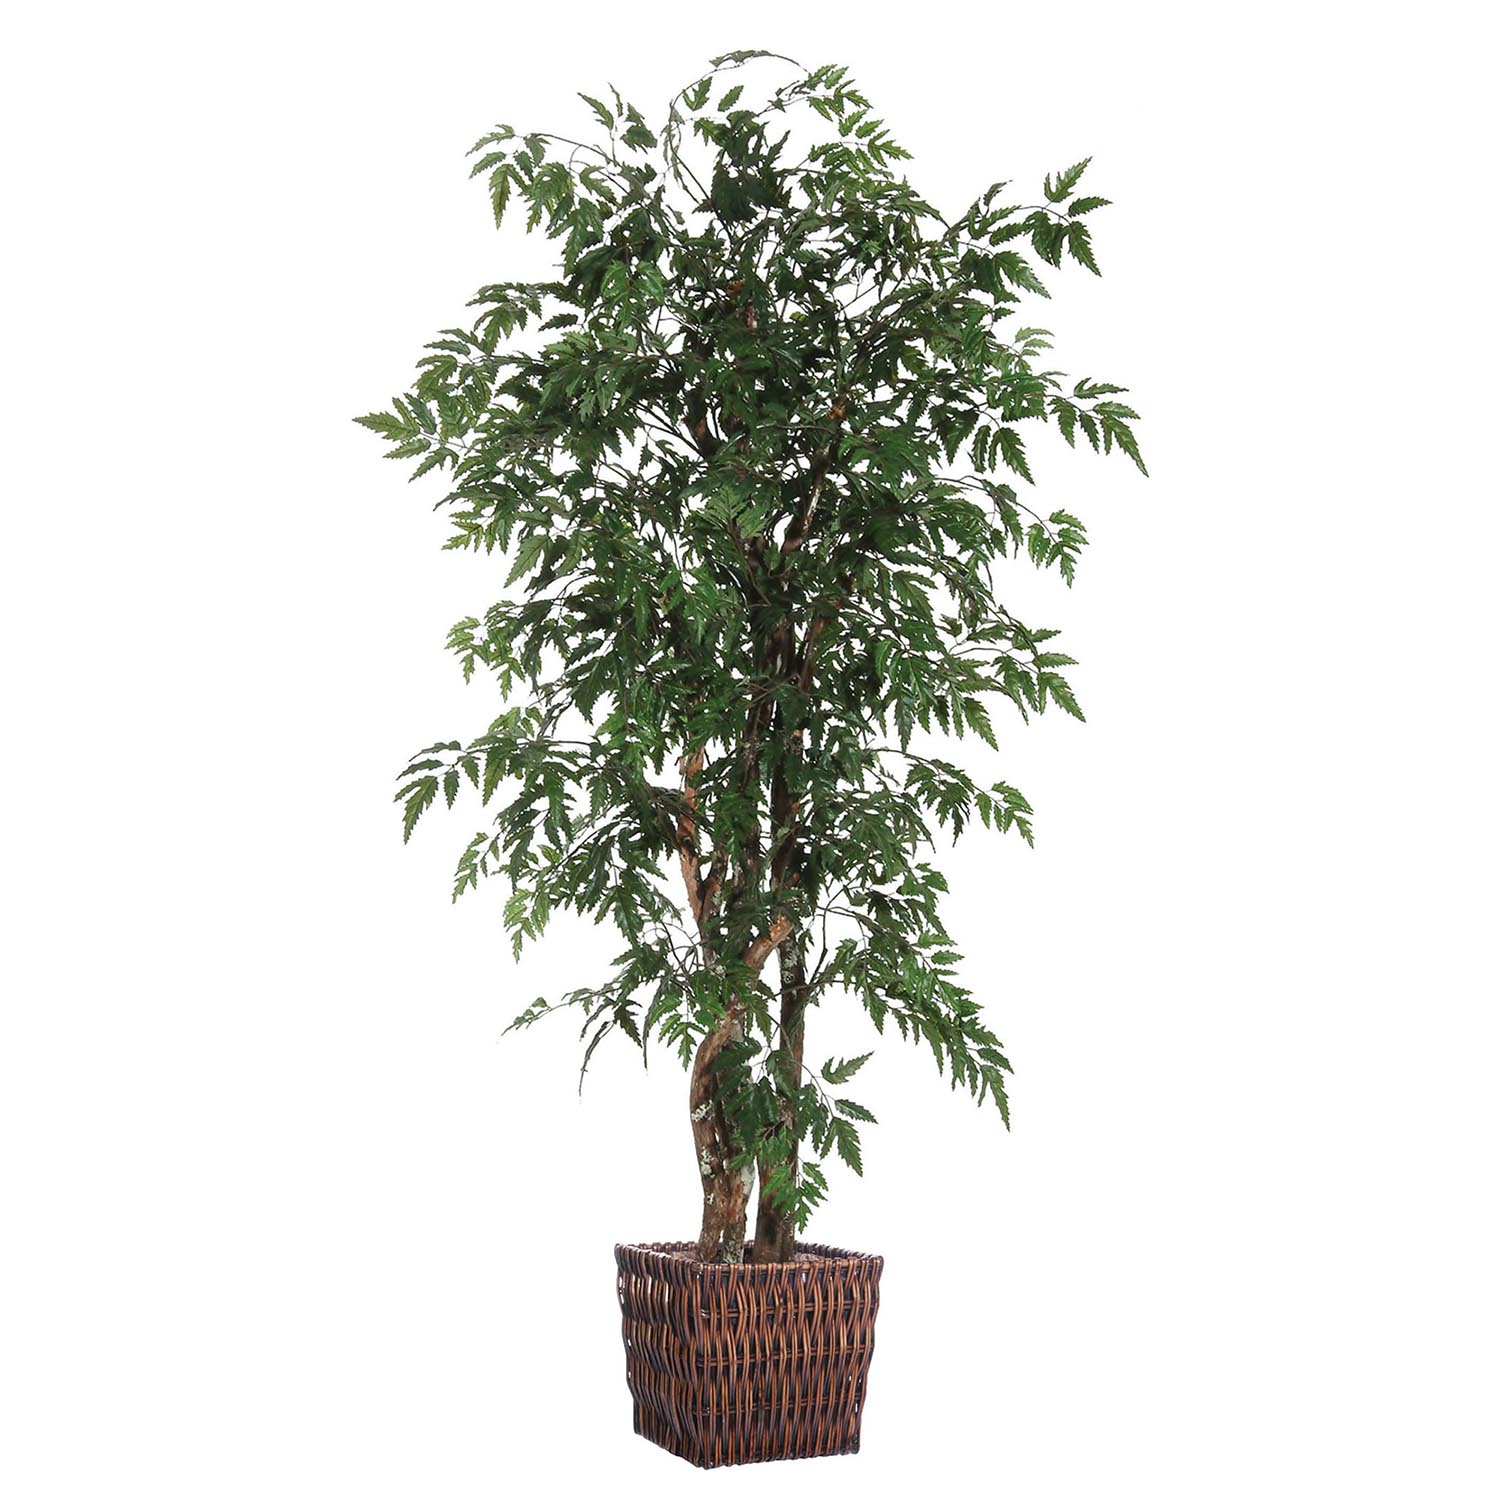 6 Foot Ming Executive Tree W/ Natural Trunk In Willow Basket